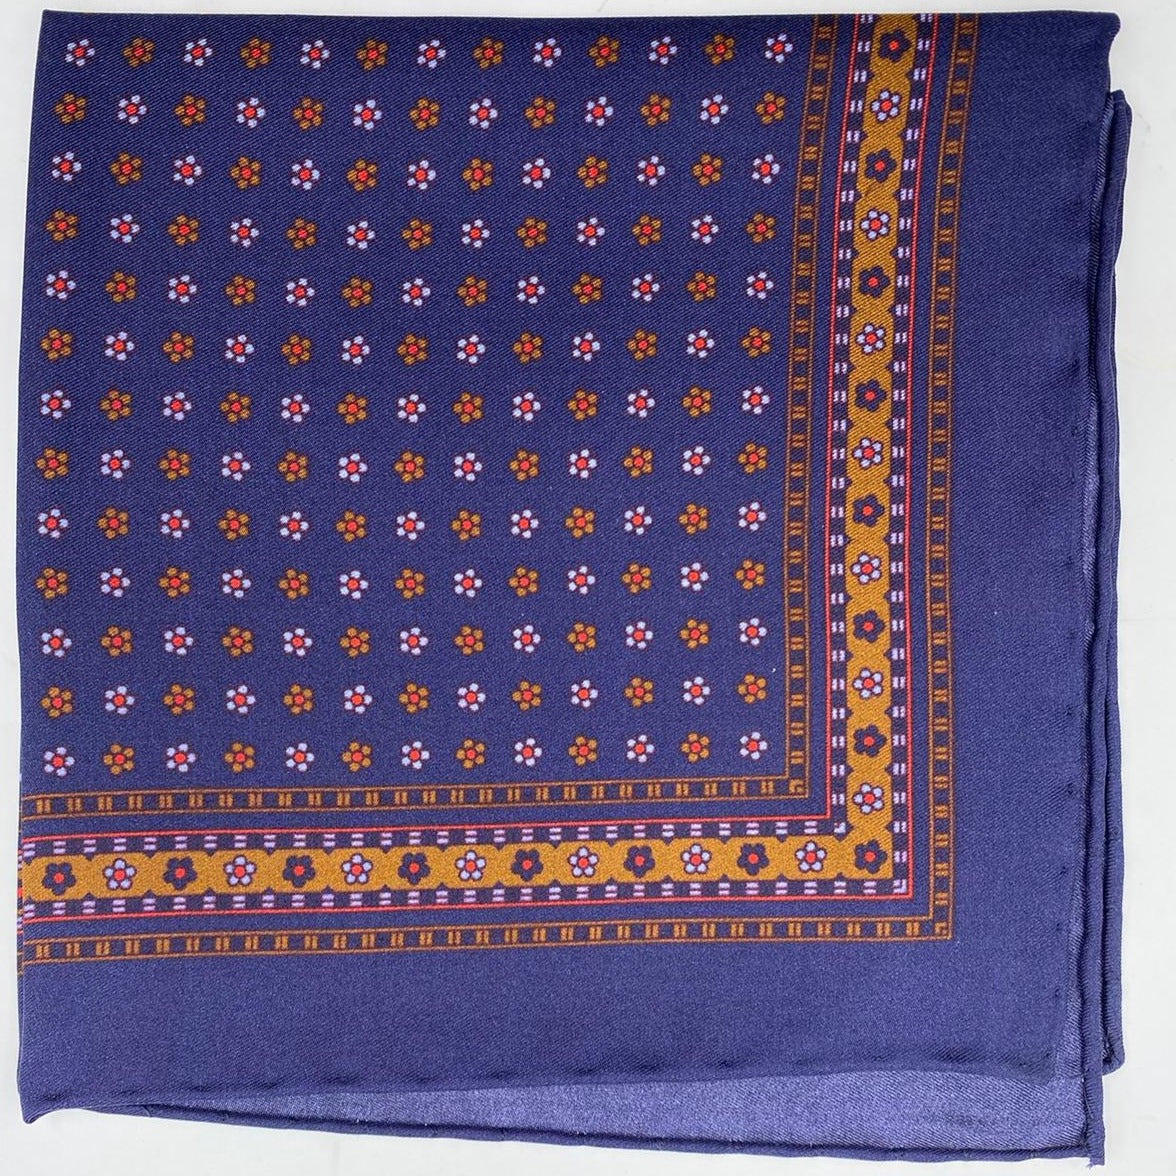 Cruciani & Bella 100% Printed Silk  Hand-rolled Blue and Brown Floral Motif Pocket Square Handmade in England 32 cm  X 32 cm #4541